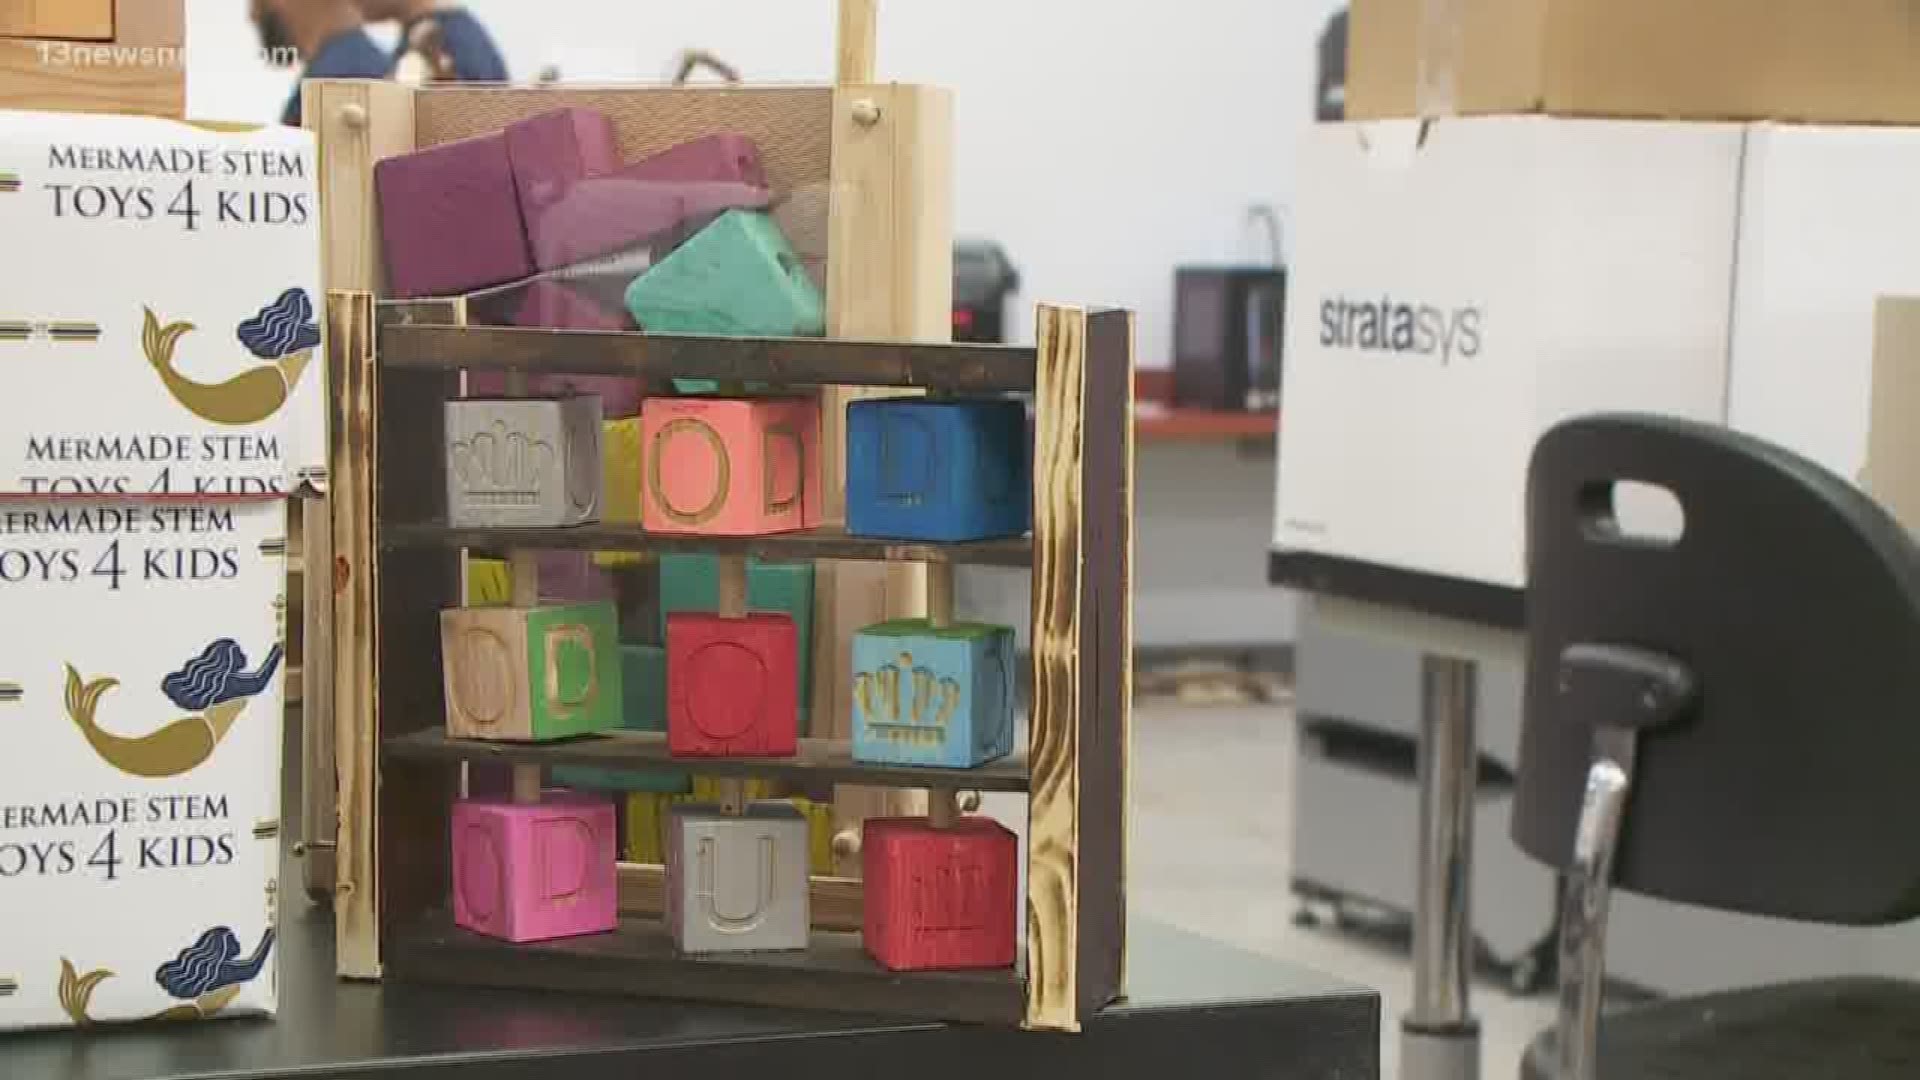 One of the classrooms at ODU was turned into a toy workshop. Students made STEM toys for patients at CHKD's children's cancer and blood disorder center.